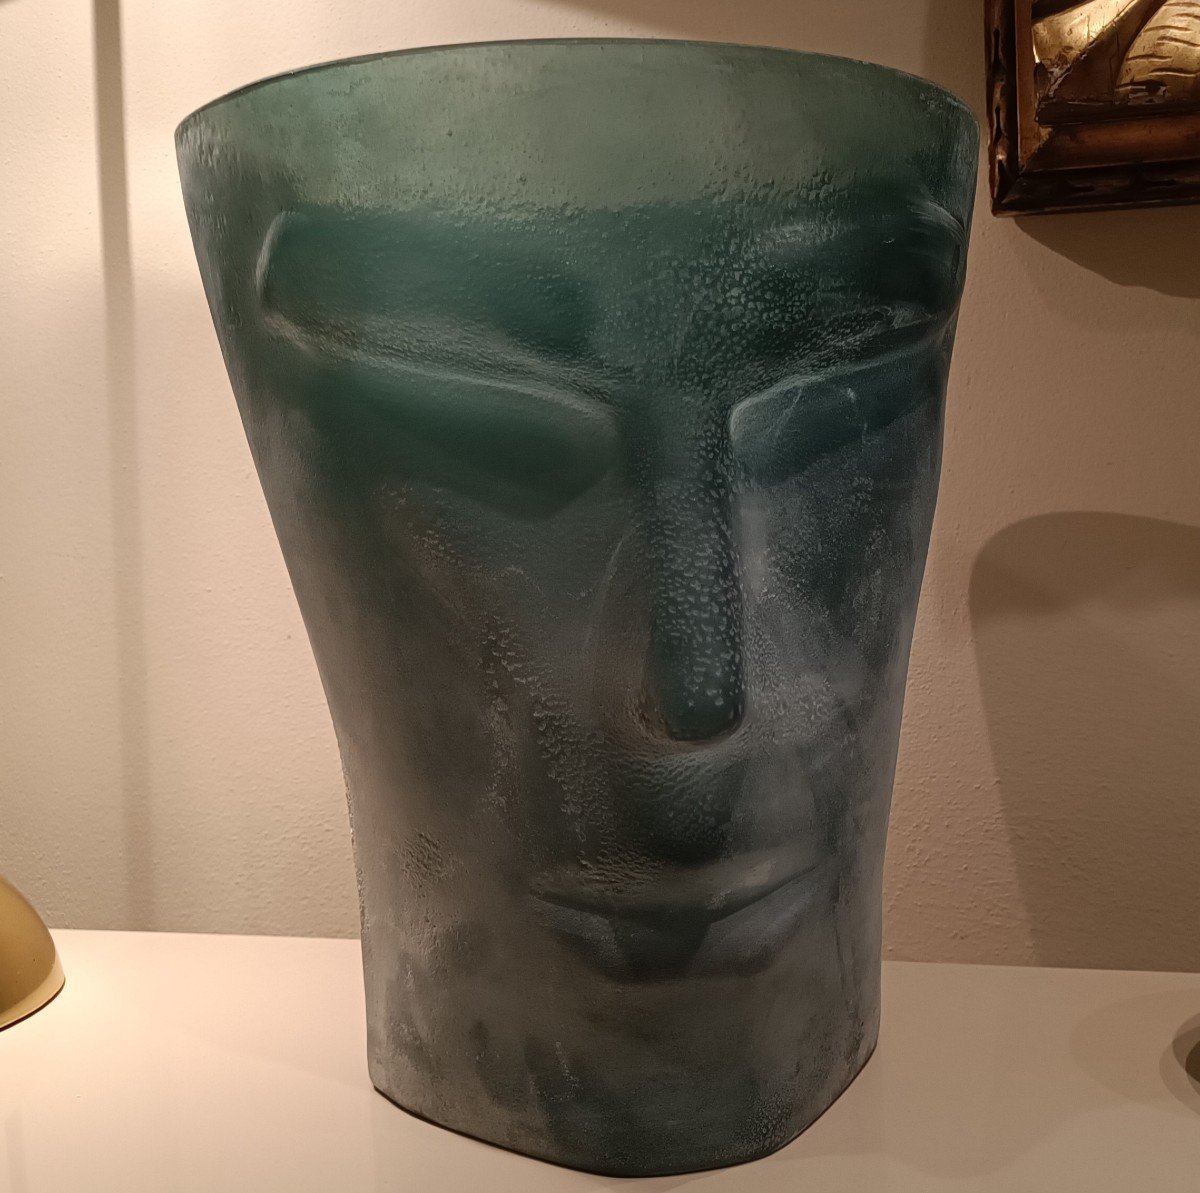 The Refined Venetian Glass Vase With Satin Finish And Man's Face-photo-2